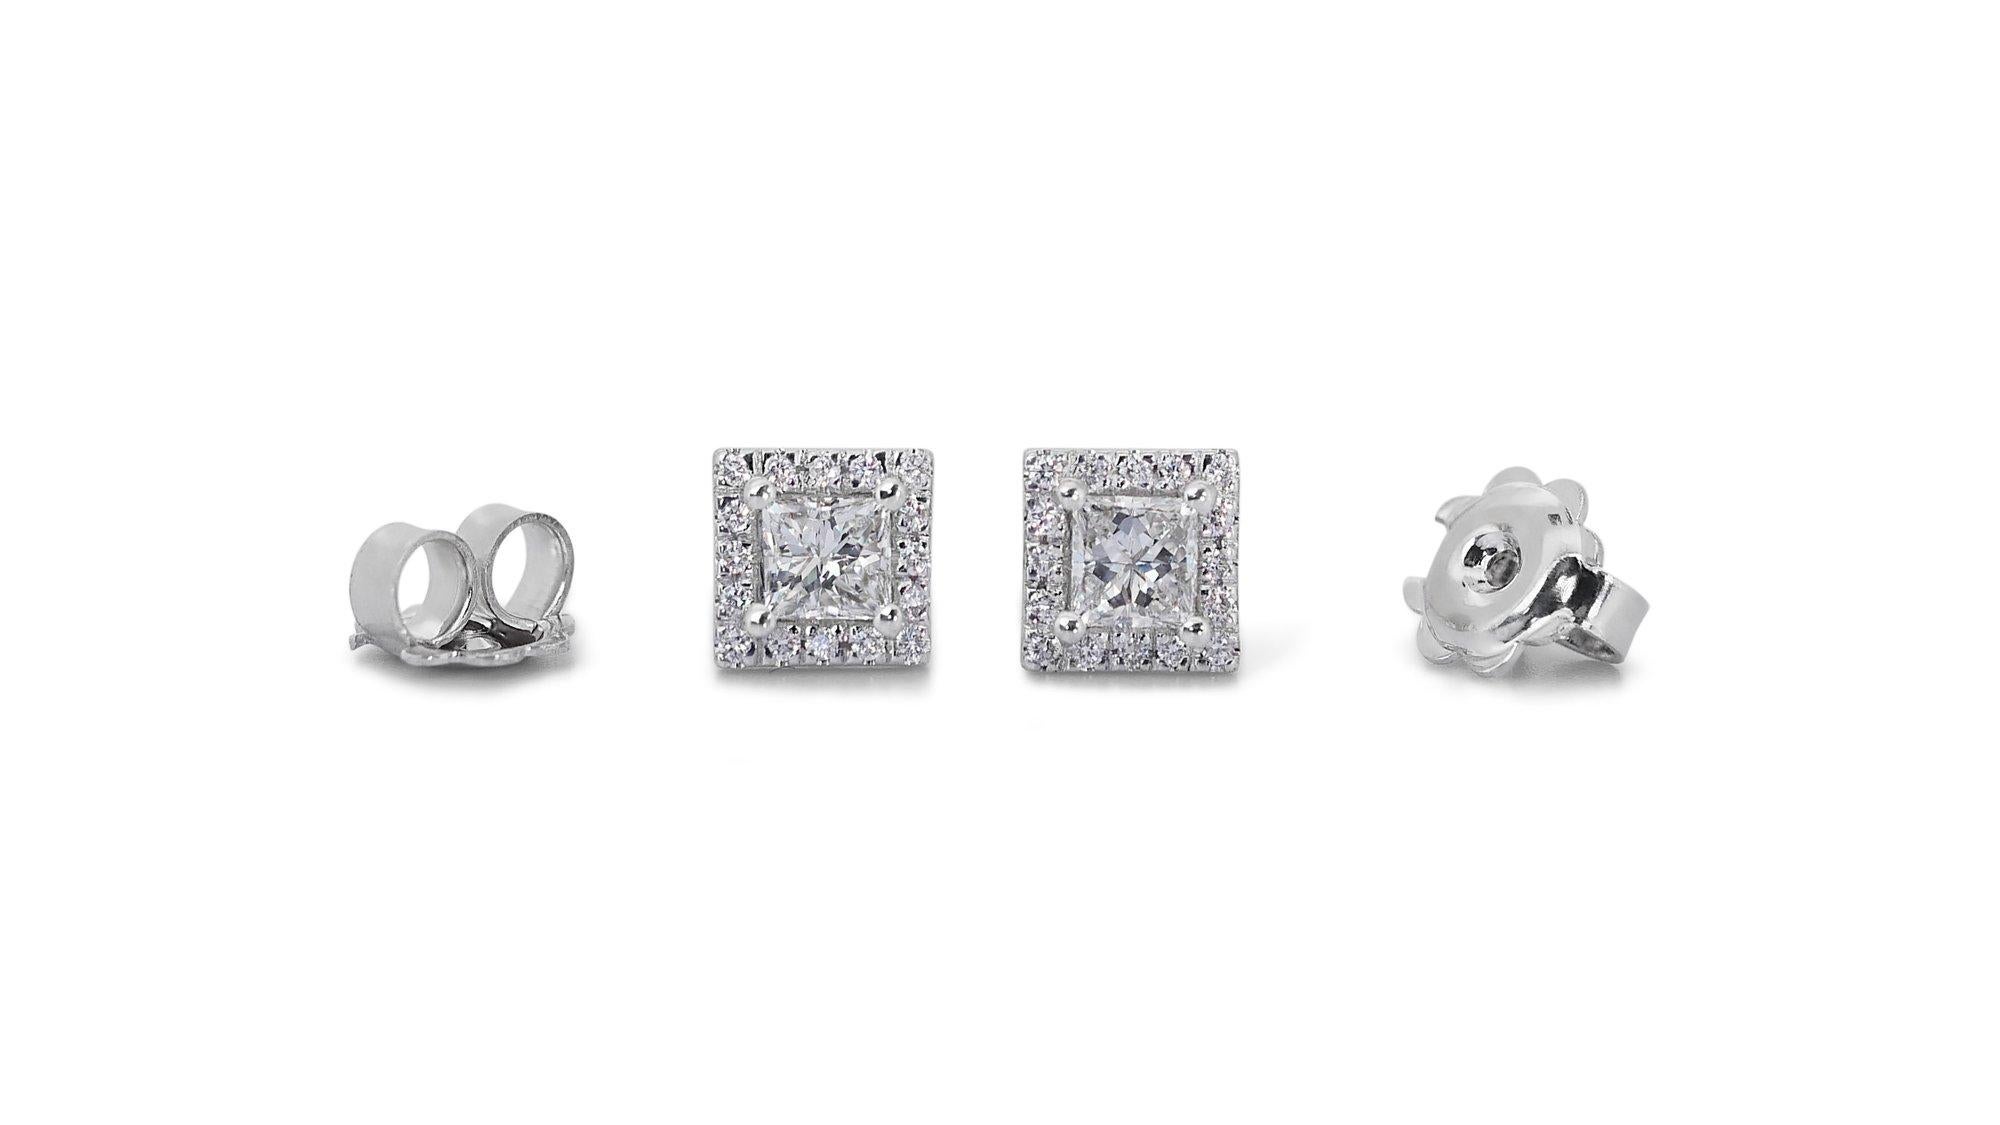 Stunning 2.37ct Diamond Stud Earrings in 18k White Gold - GIA Certified For Sale 3